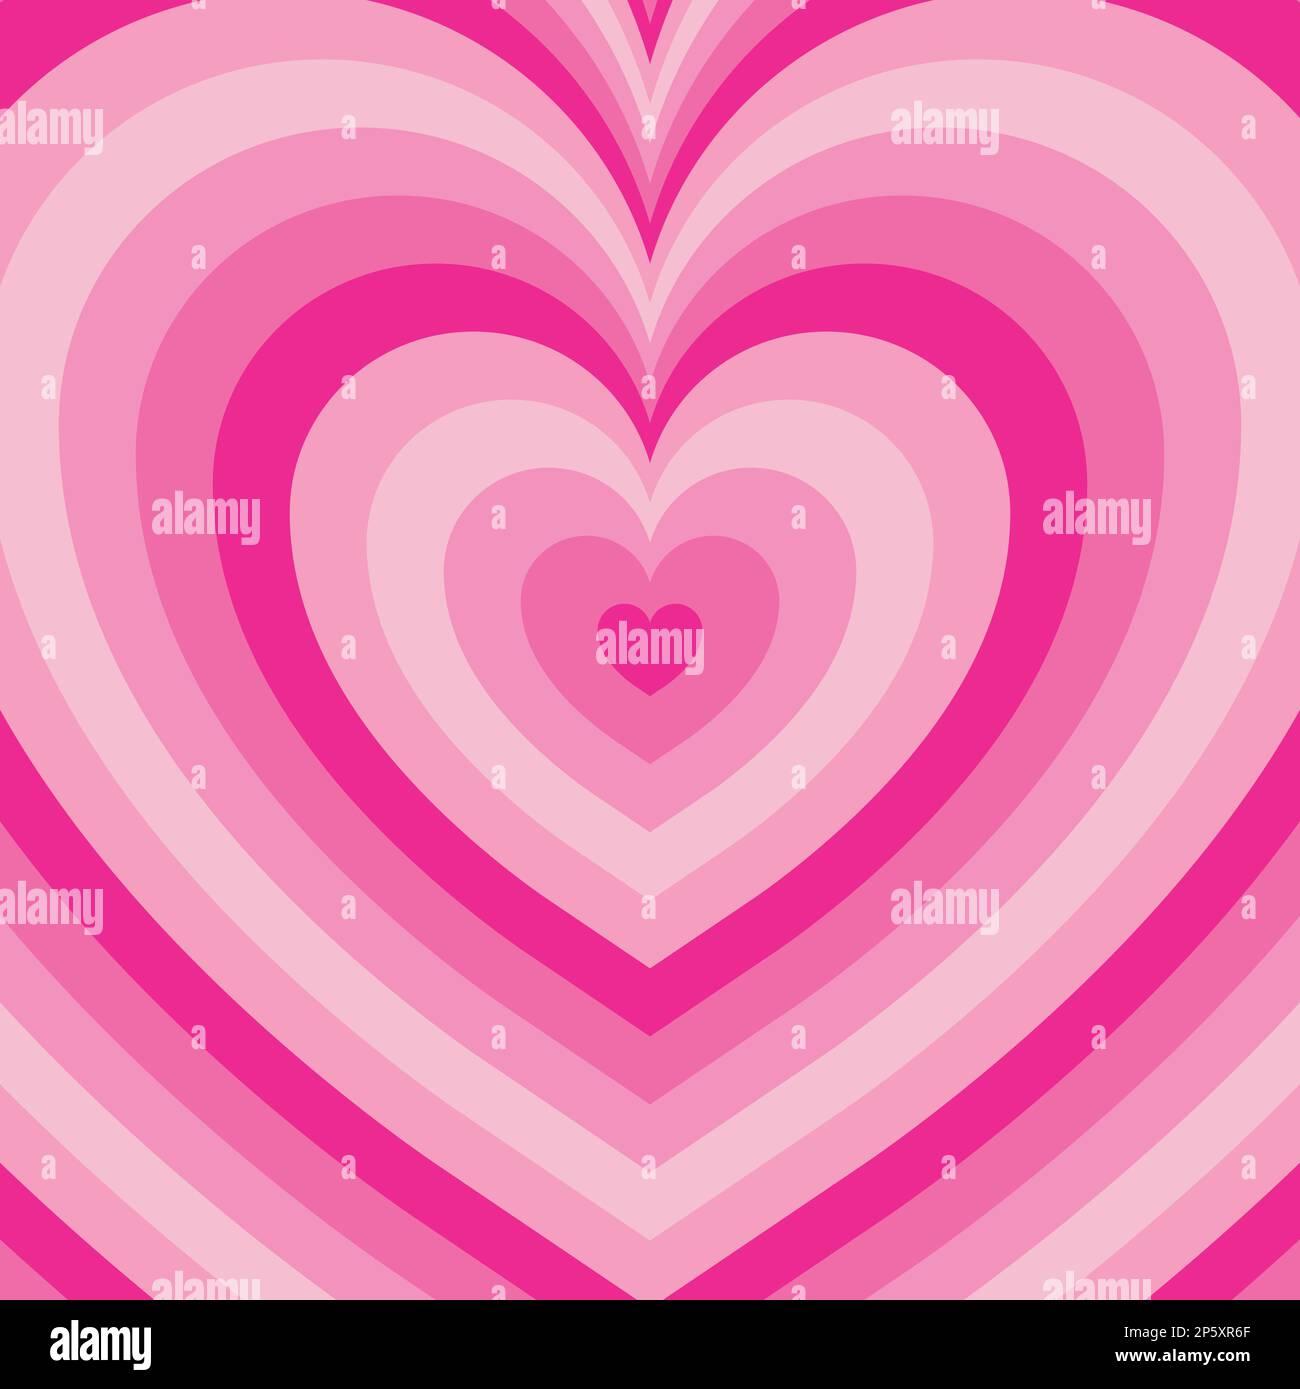 Free Download Pink Heart Background In Retro Style Love Wallpaper Design Stock X For